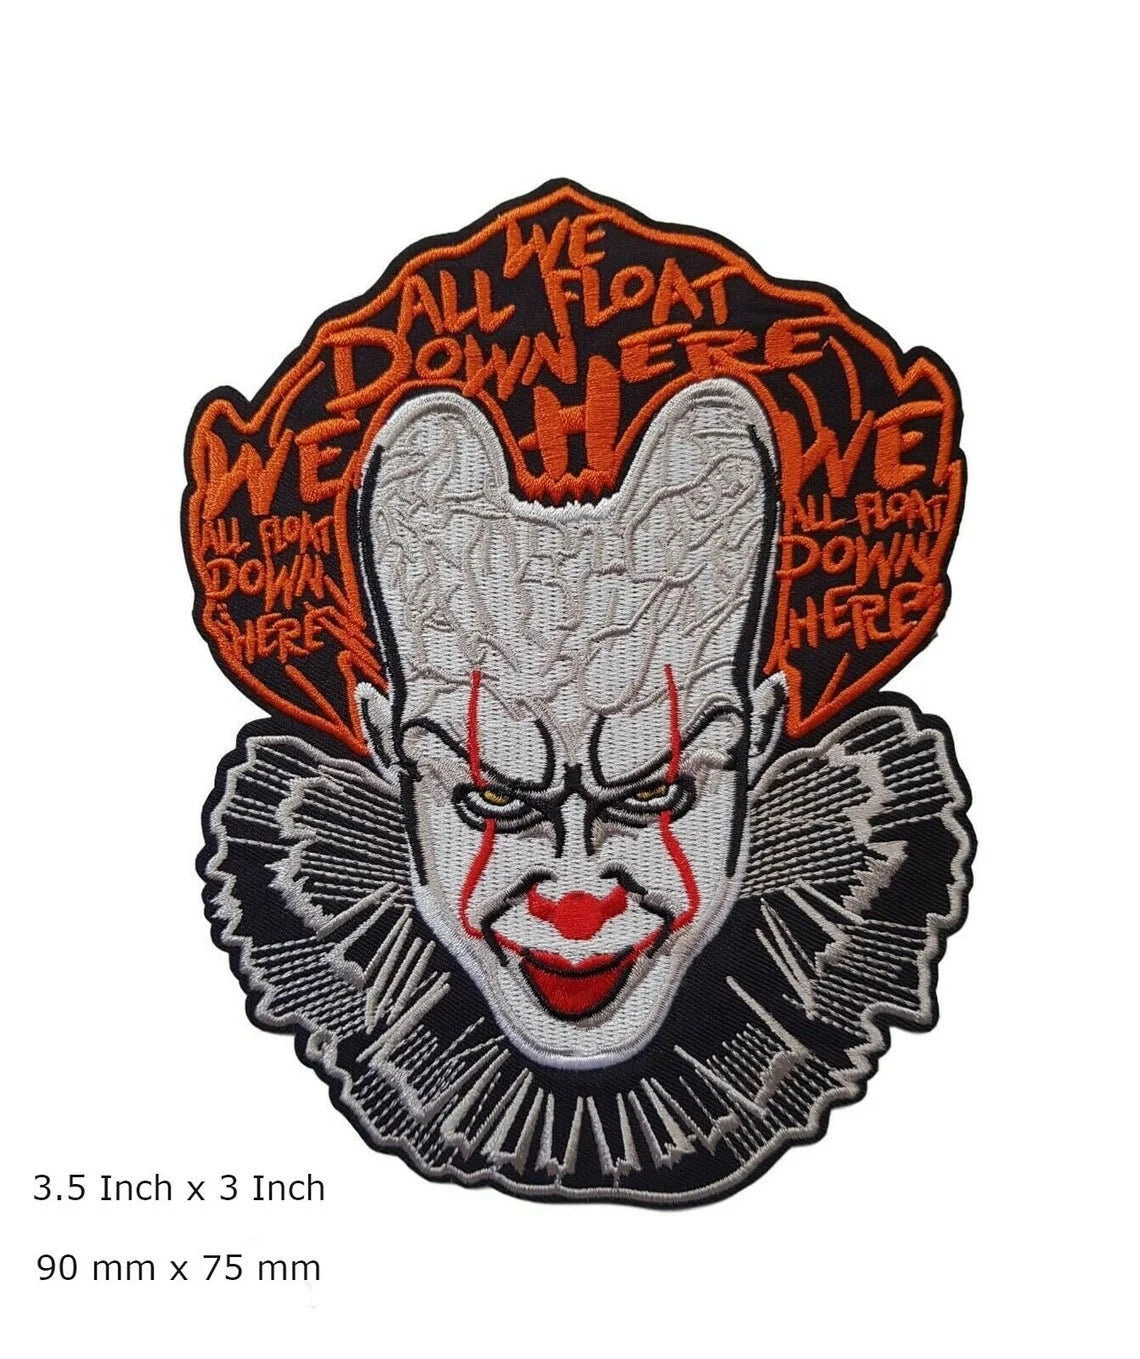 Pennywise The Dancing Clown Patch (3.5 Inch)  Iron or Sew-on Badge IT Horror Movie Costume Patches